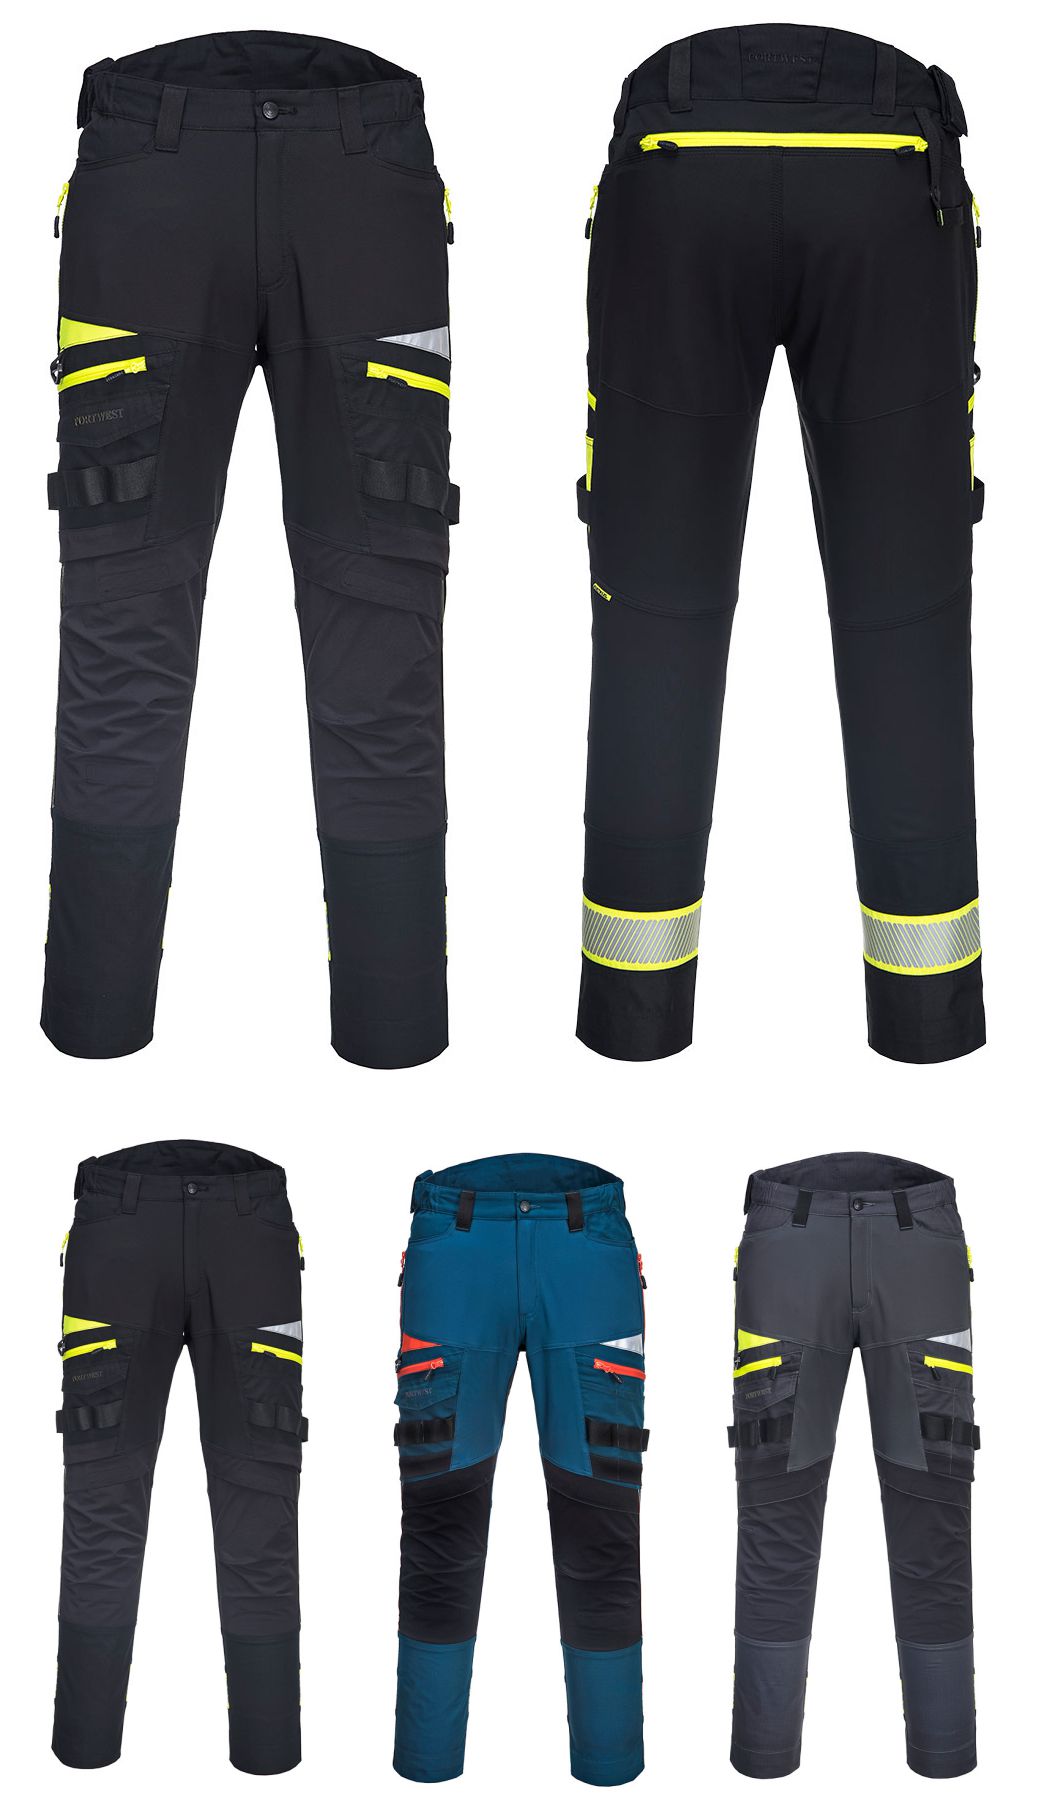 DX449 Portwest Work Trousers